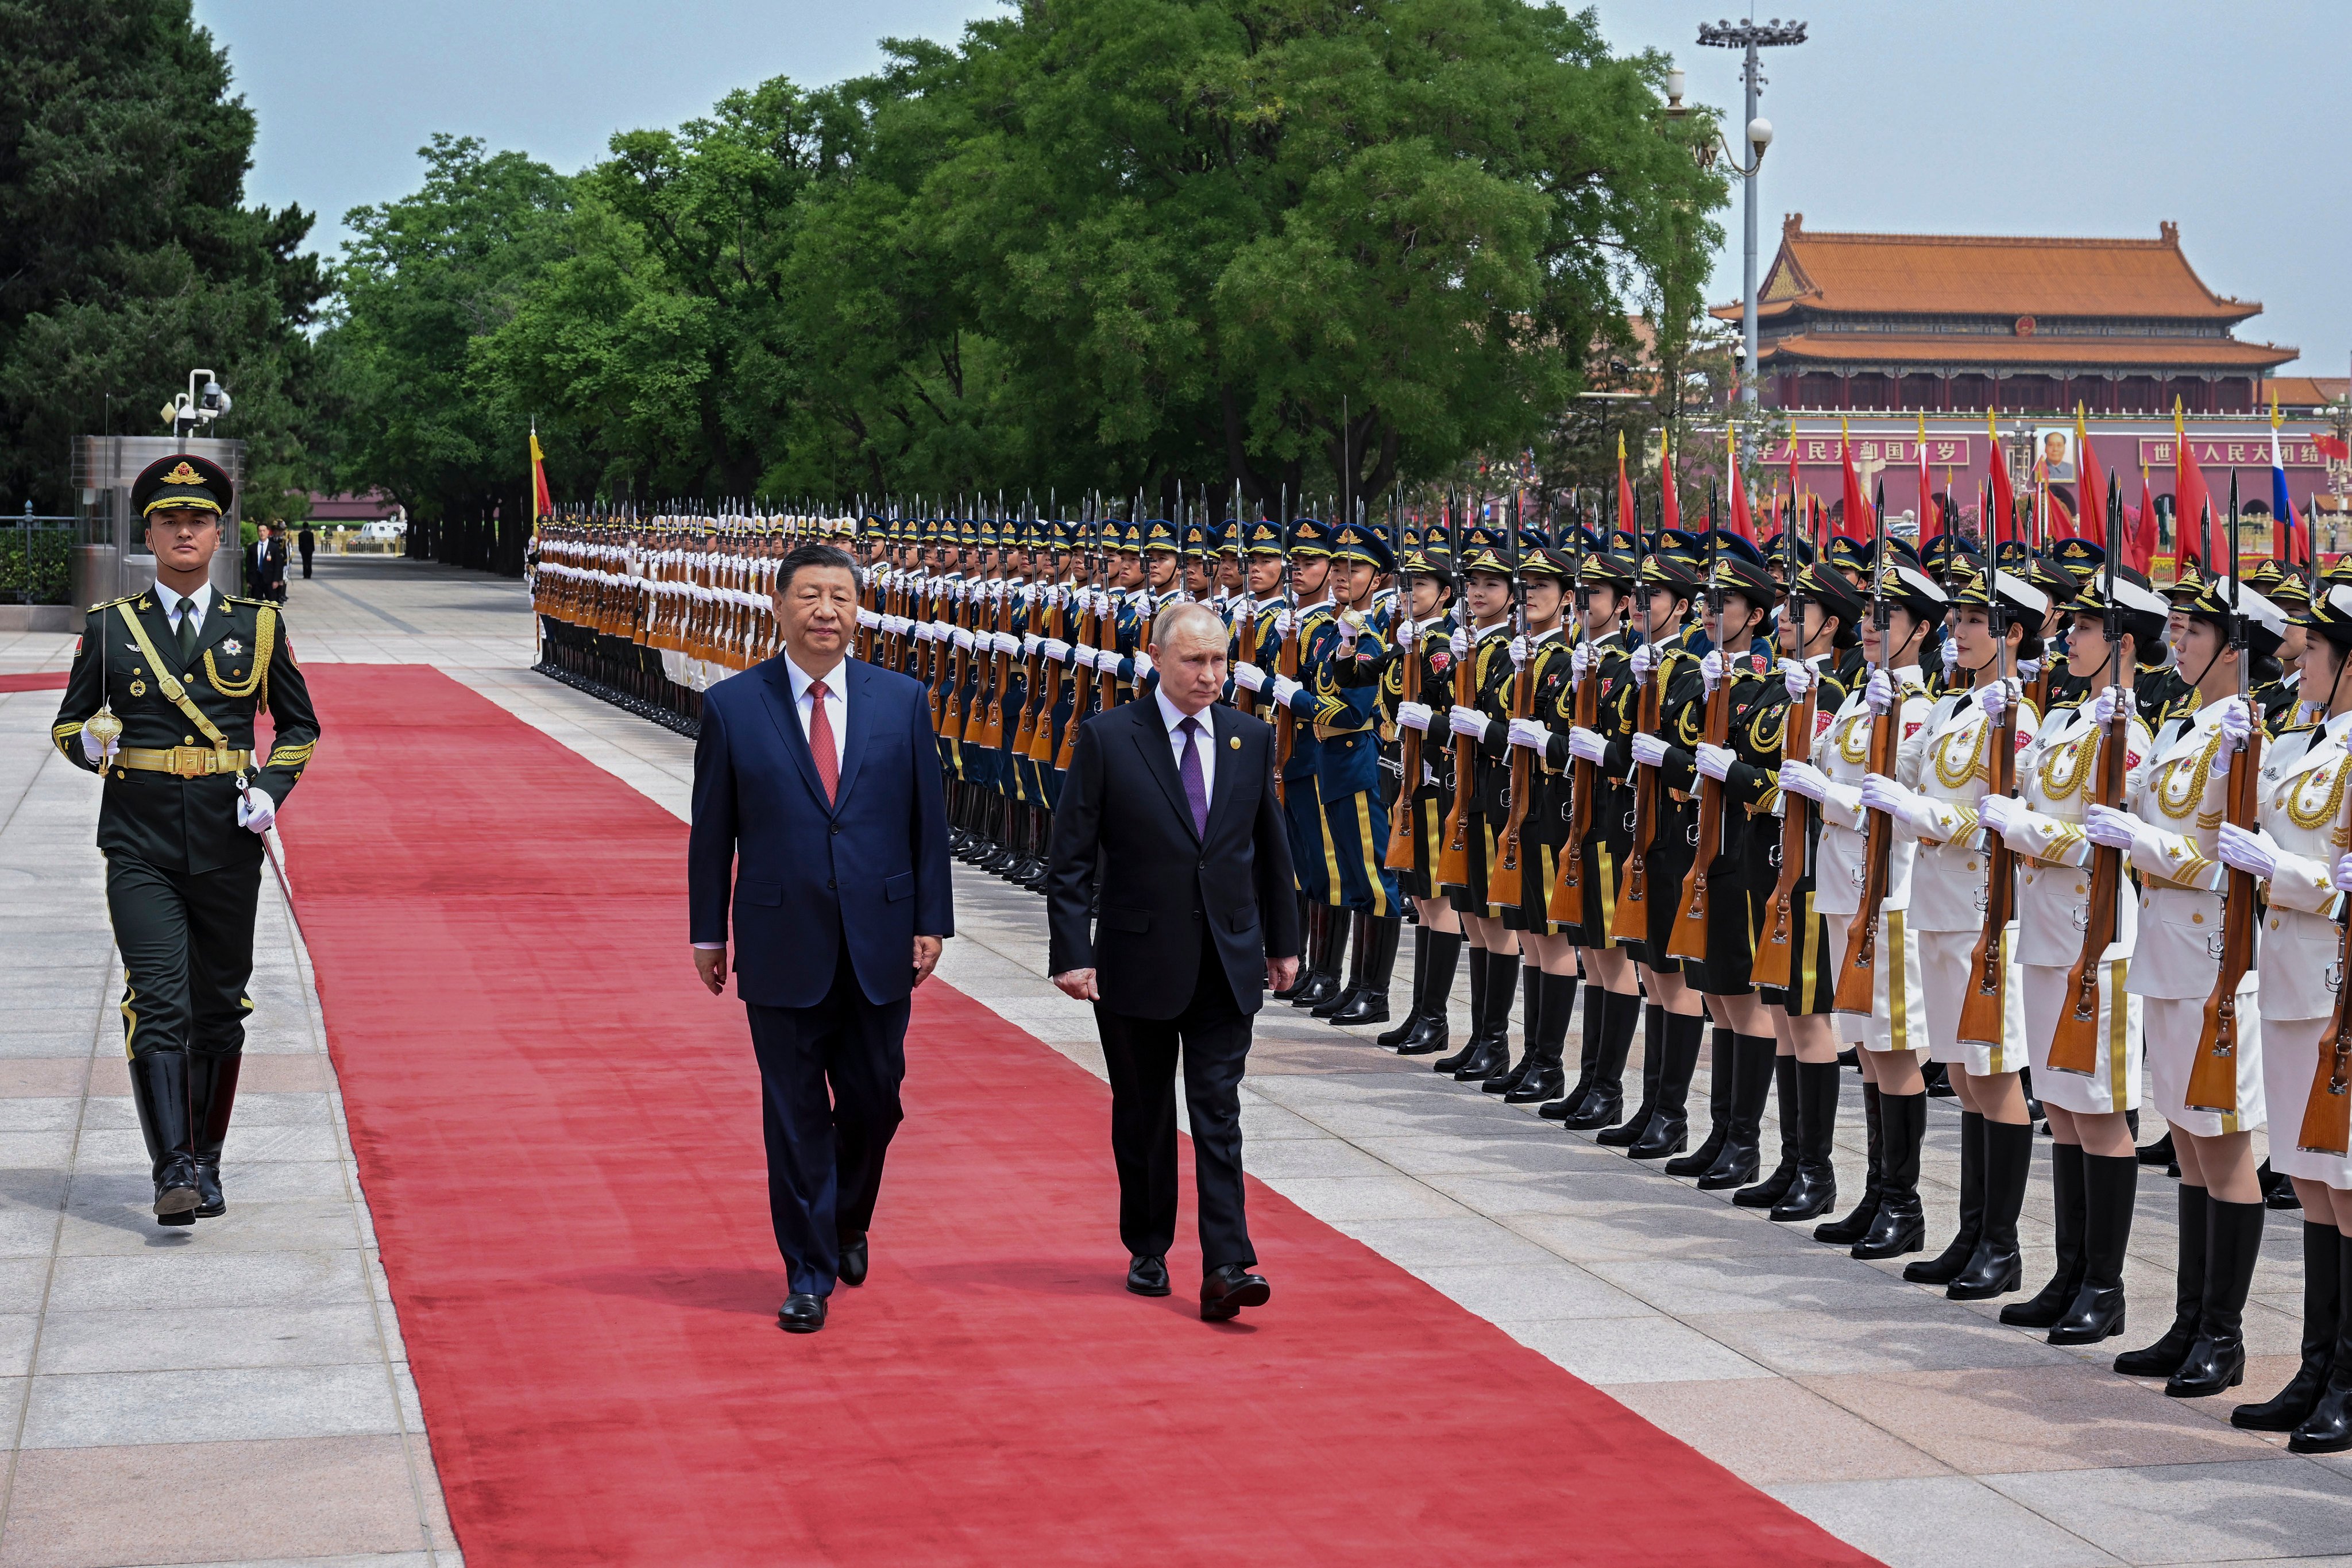 Chinese President Xi Jinping (left) and Russian President Vladimir Putin review the honour guard during a welcome ceremony at the Great Hall of the People in Beijing on Thursday. Photo: Xinhua via AP